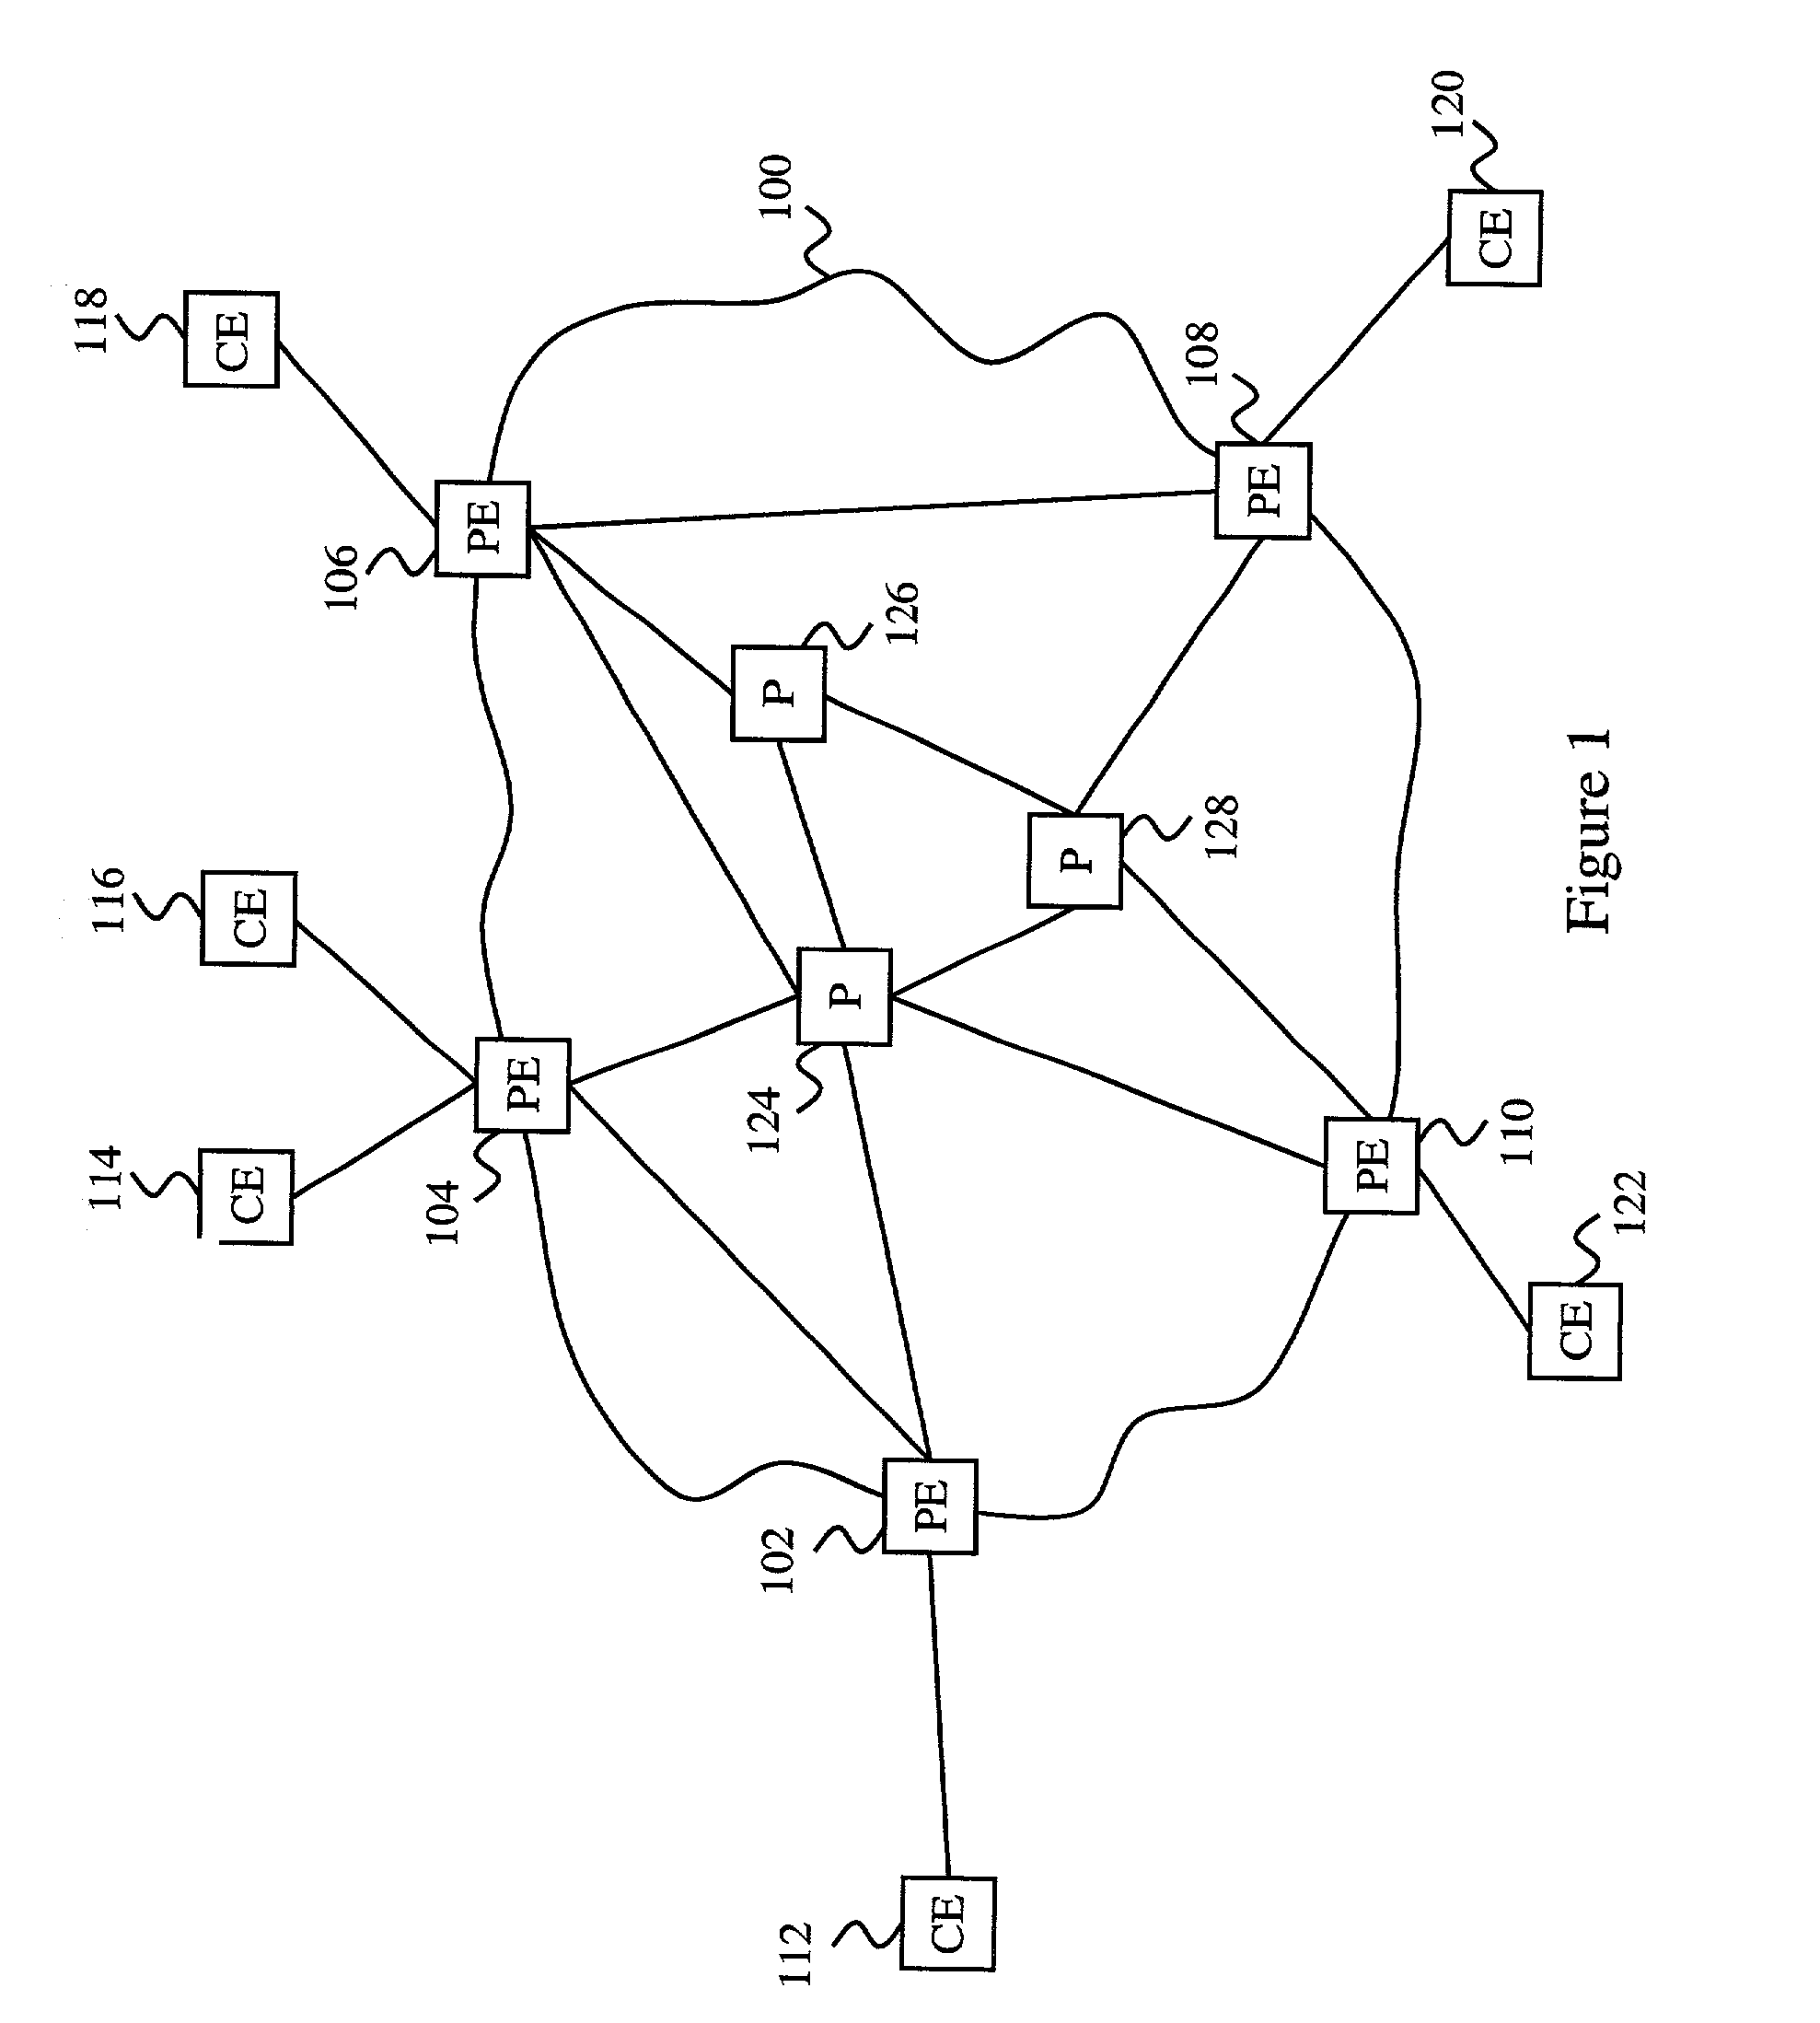 Packet transmission scheduling in a data communication network